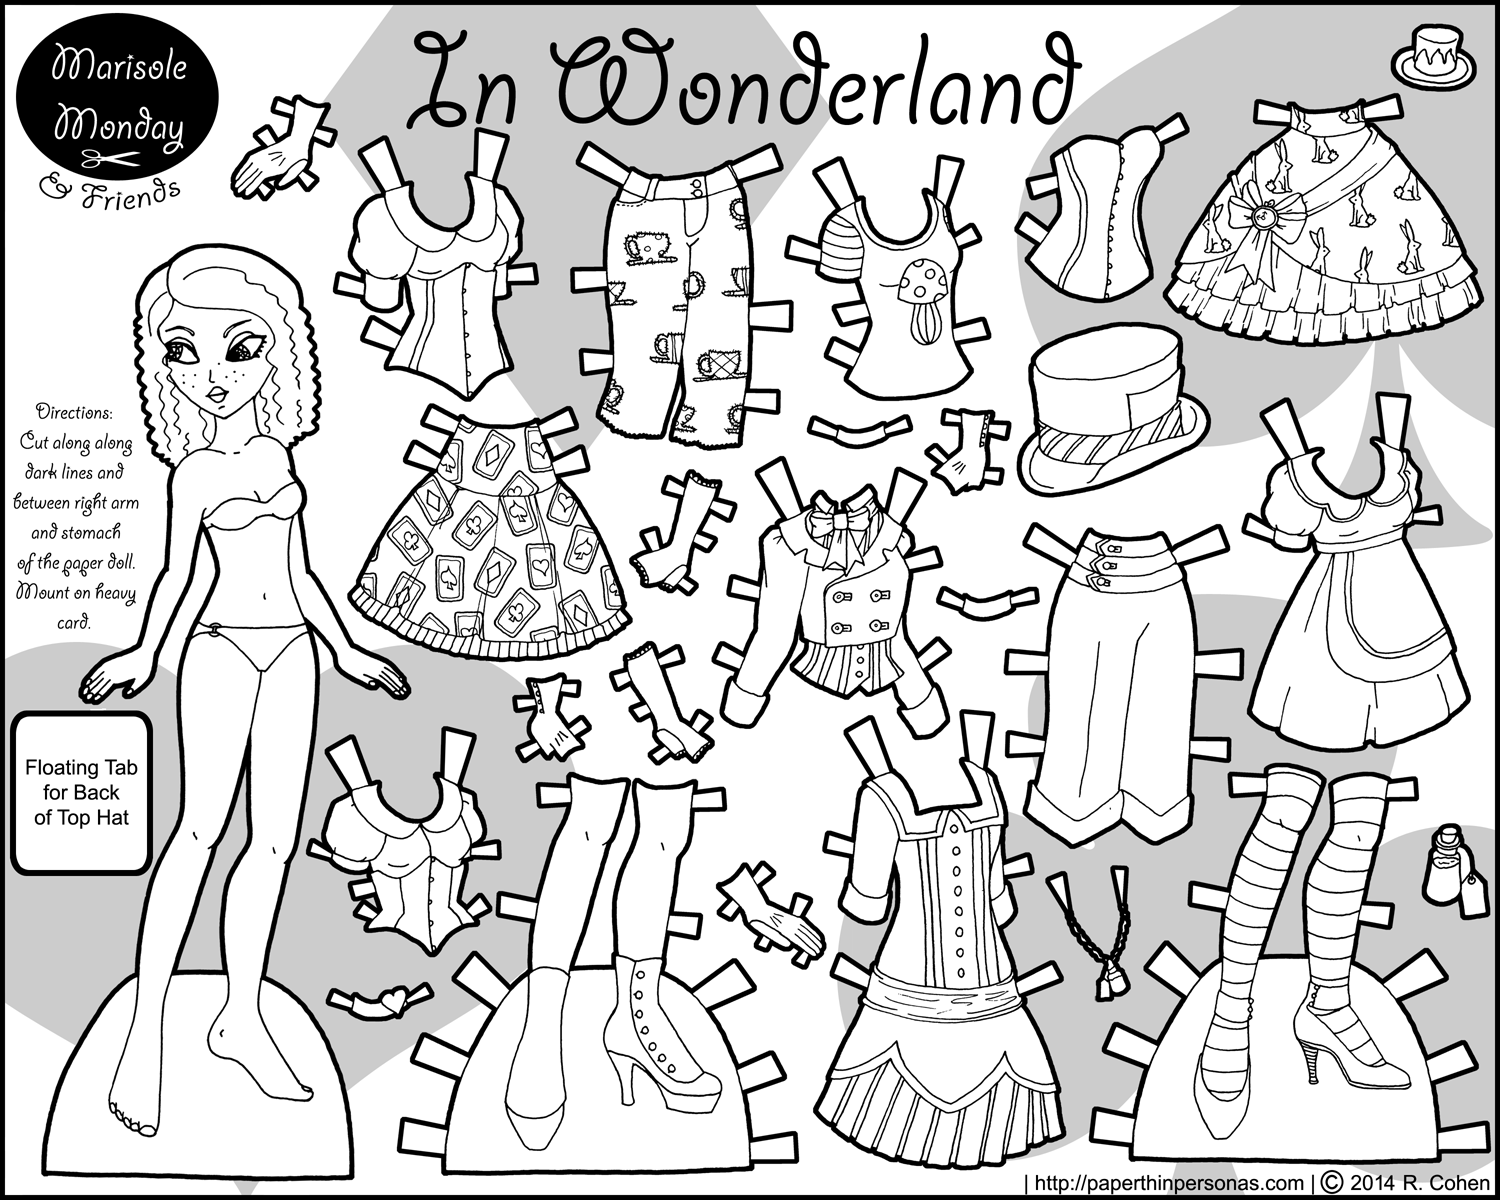 Margot in Wonderland… Printable Paper Doll to Color - Paper Thin